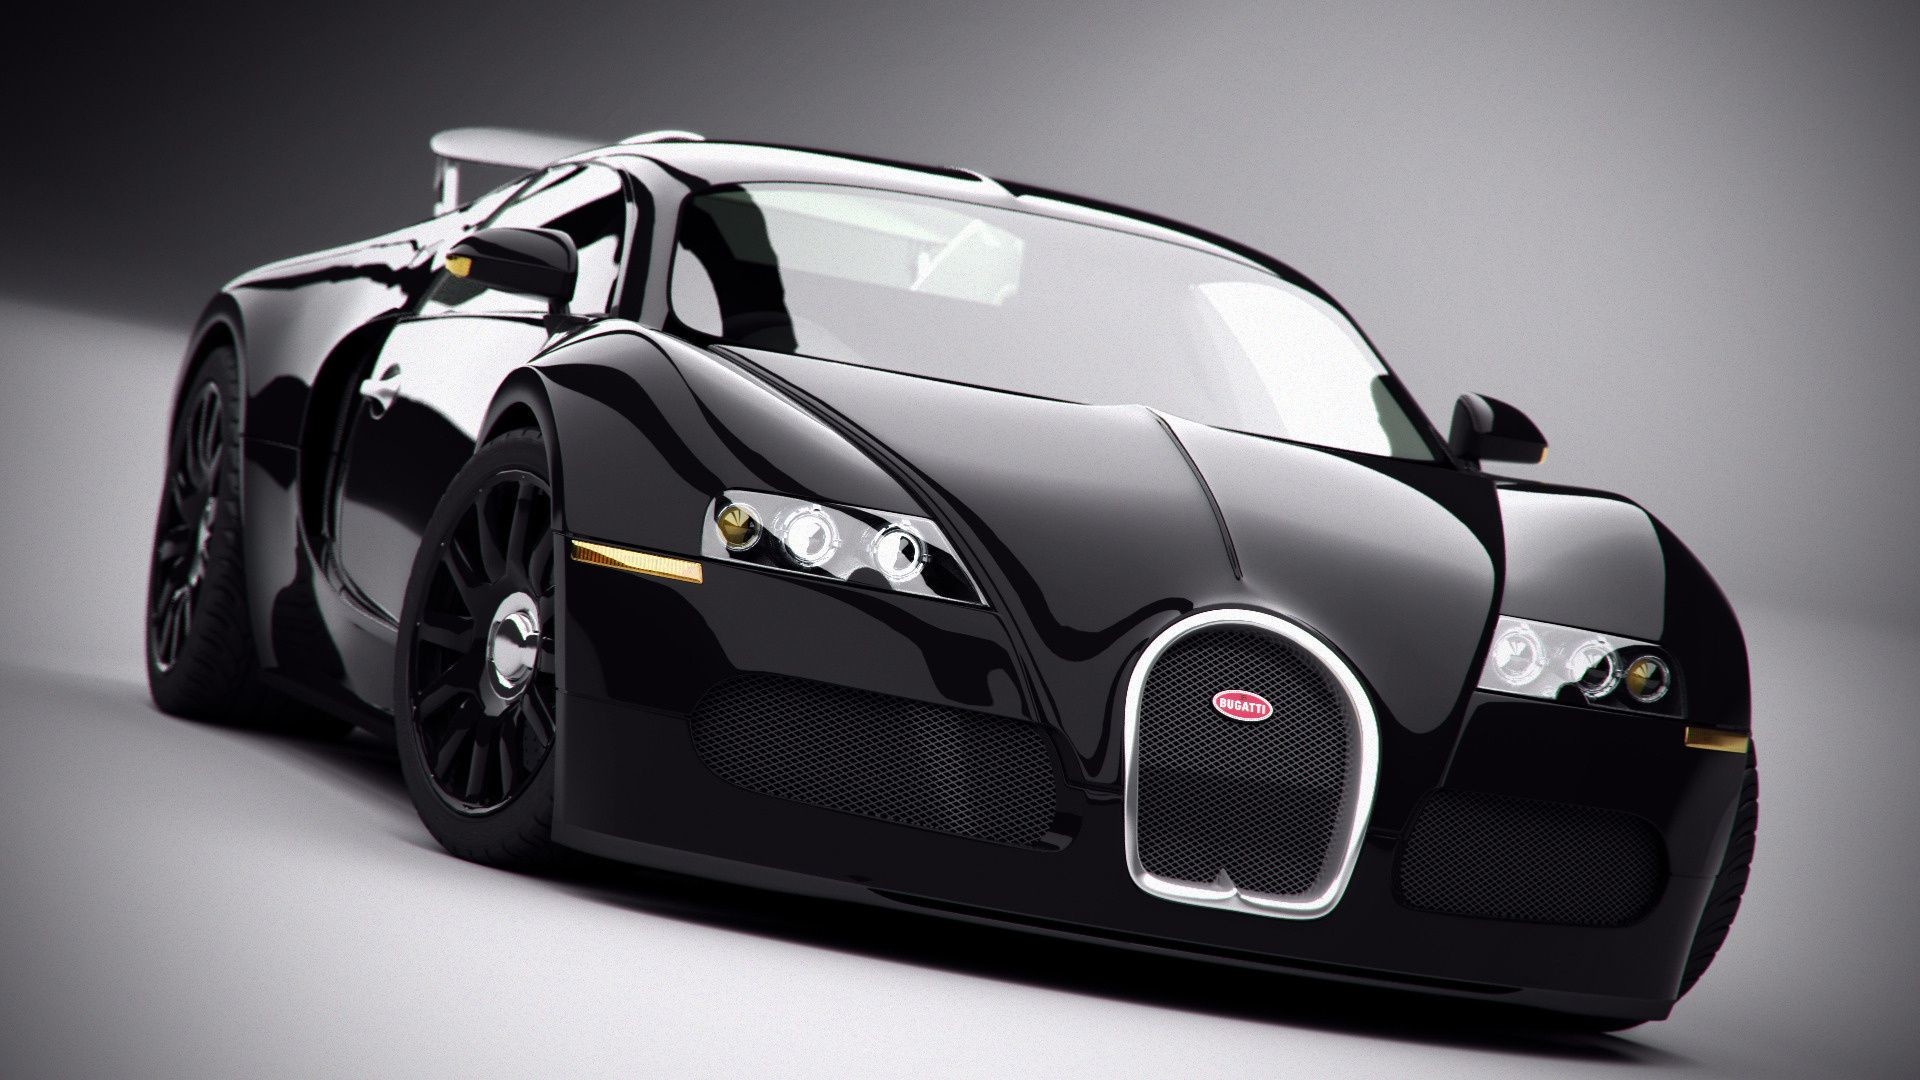 1920x1080 10 World's Most Expensive Cars Owned By Celebrities: Bugatti & Maybach's  Luxurious Alternatives To Ordinary Rides - Financesonline.com